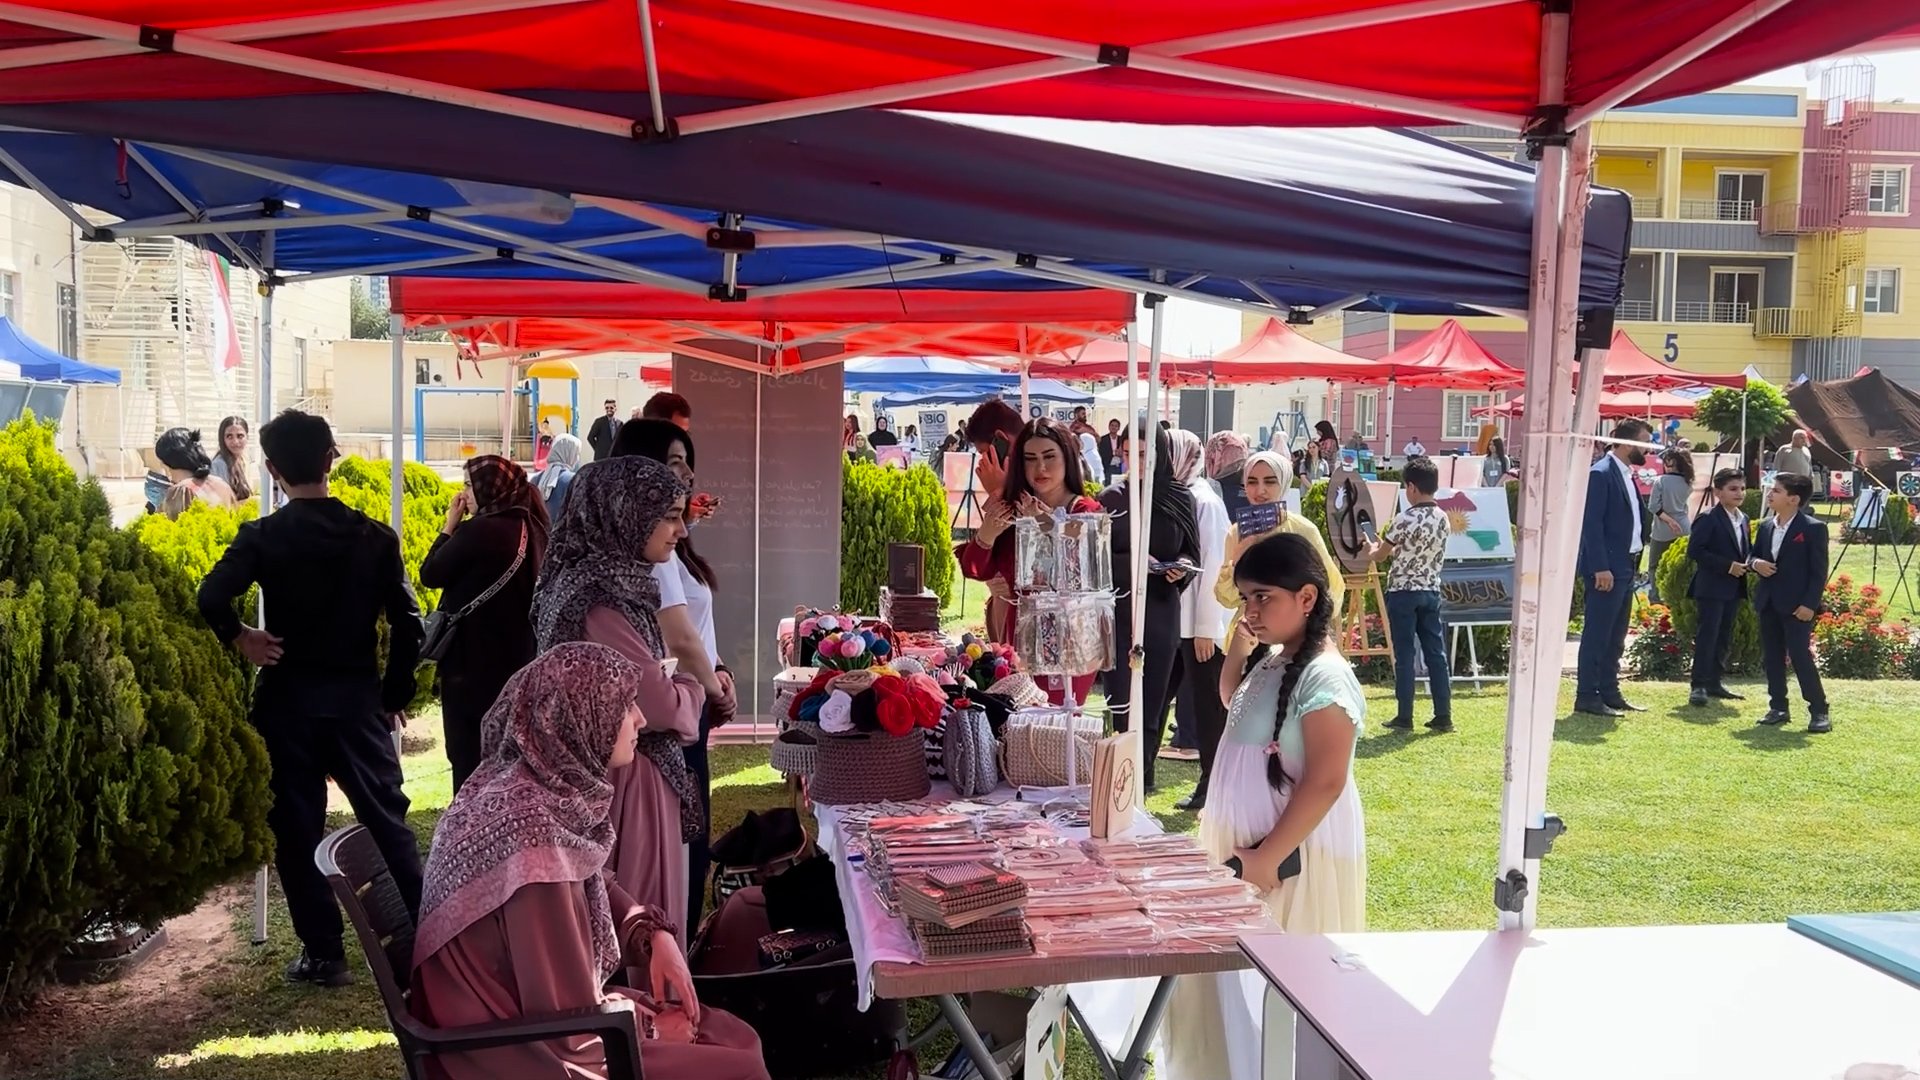 Nanakeli Hospital holds spring festival in Erbil to benefit cancer patients